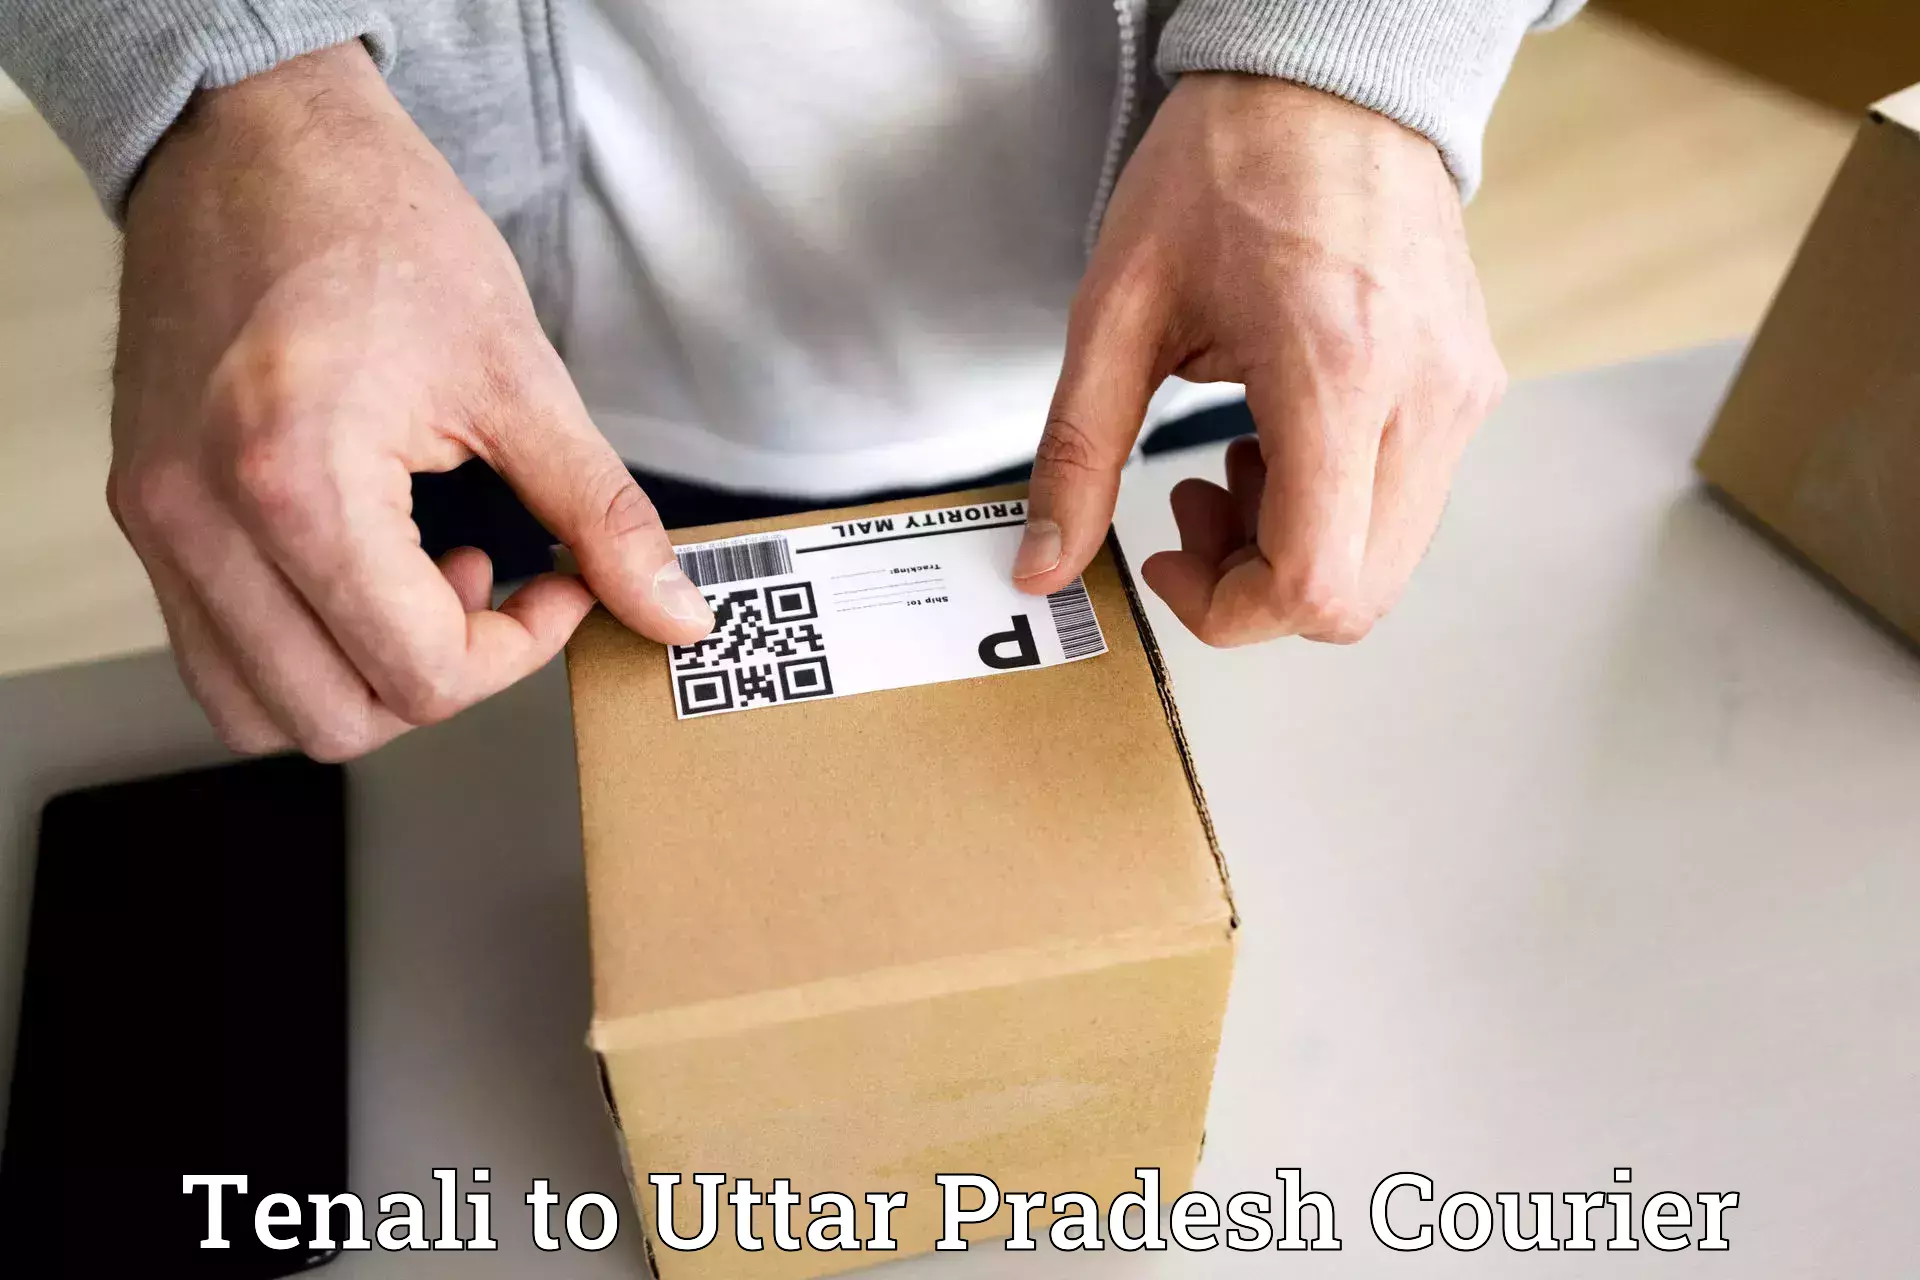 Package delivery network Tenali to Uttar Pradesh